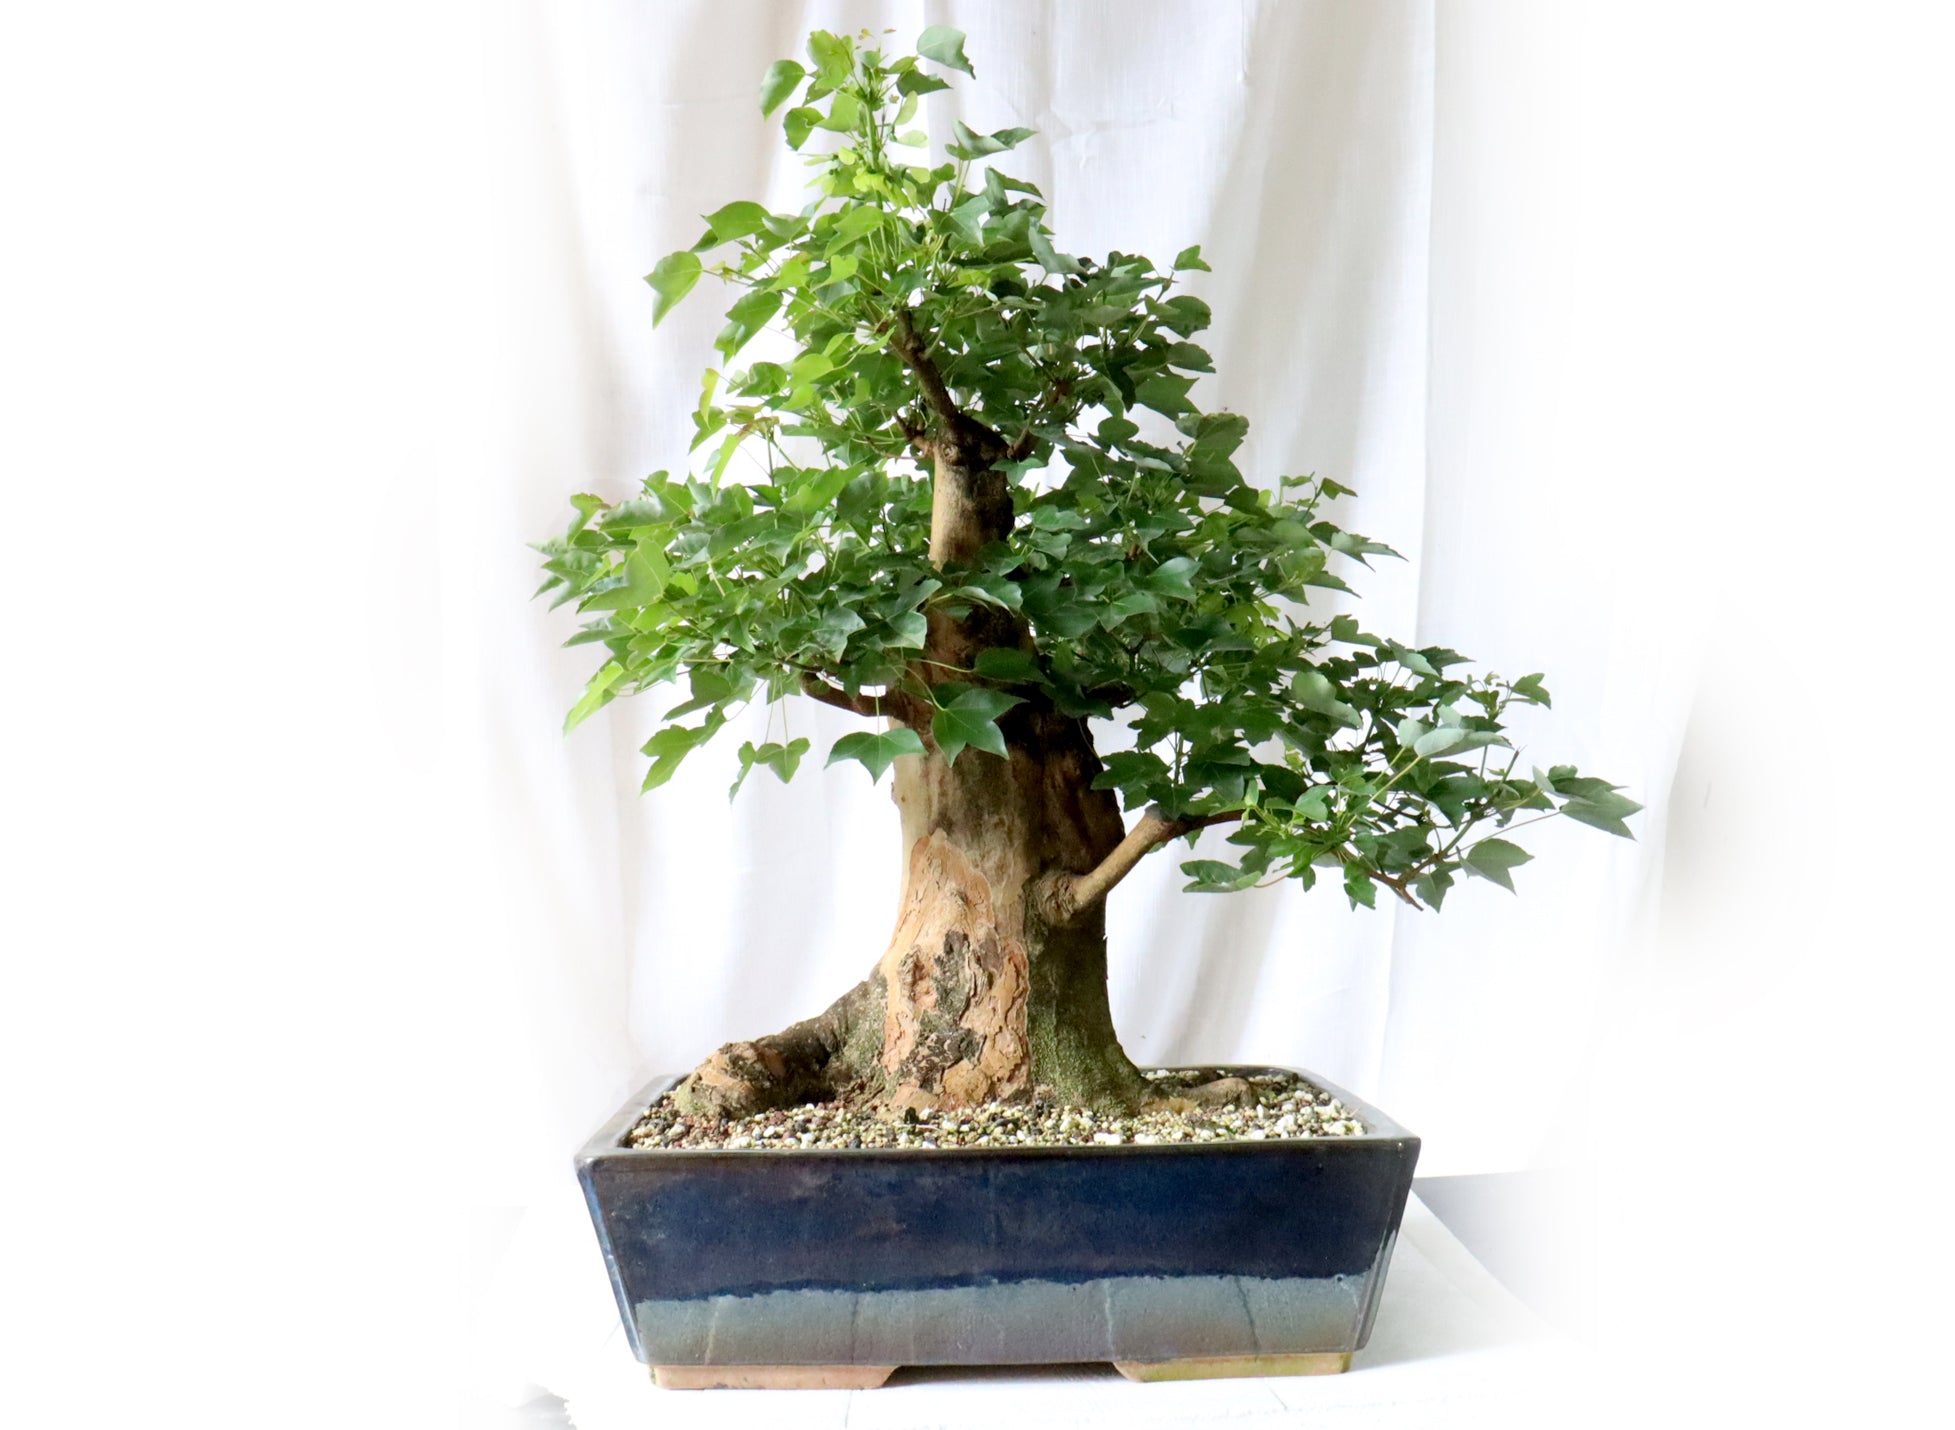 Trident Maple Specimen in a Glazed Blue Container